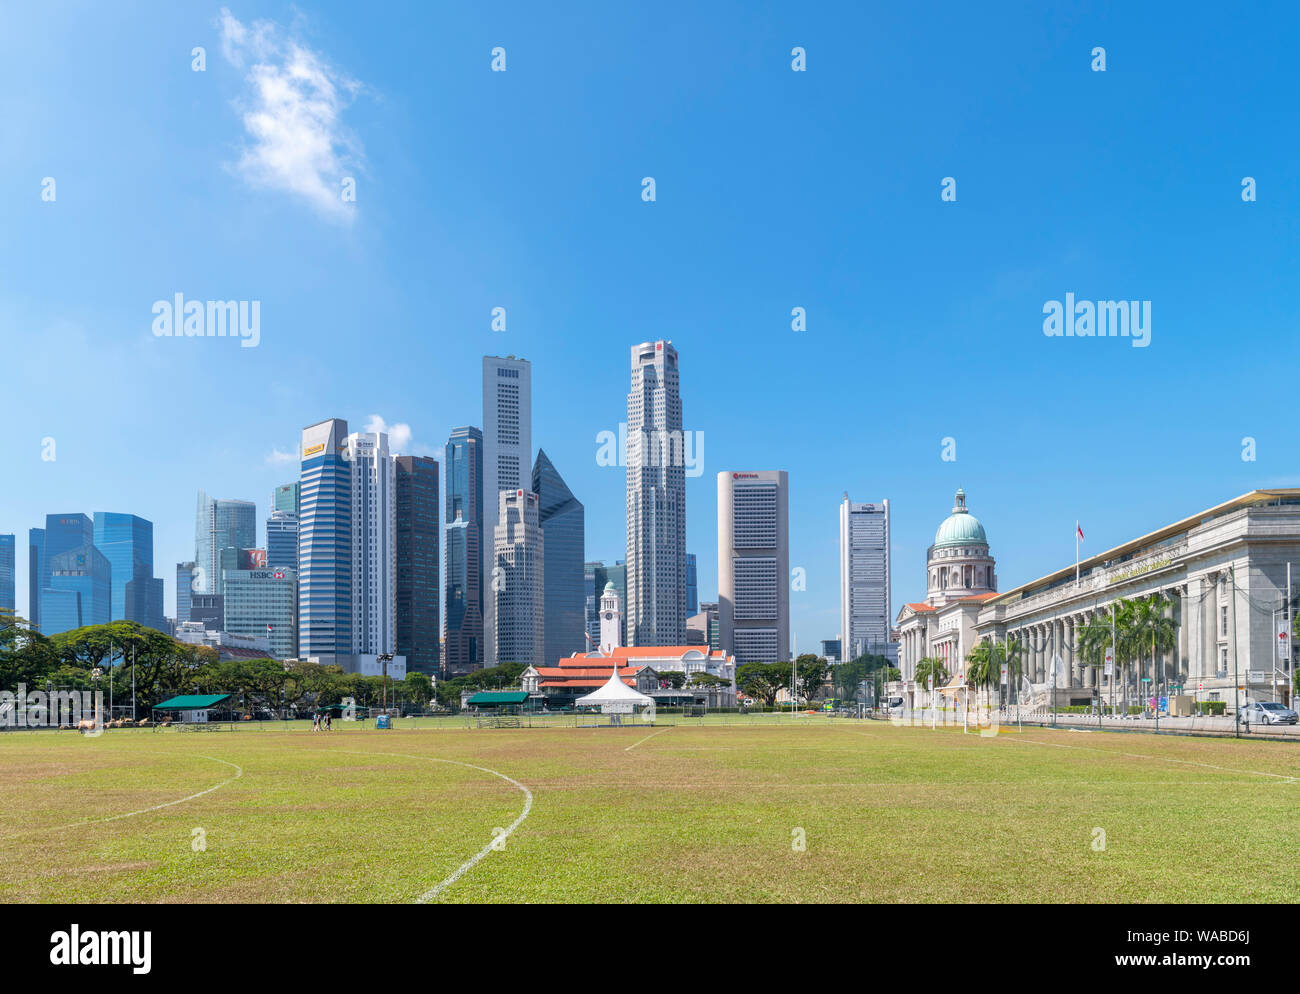 The downtown skyline and National Gallery of Singapore viewed from the Padang, a sports ground in the city centre, Singapore City, Singapore Stock Photo